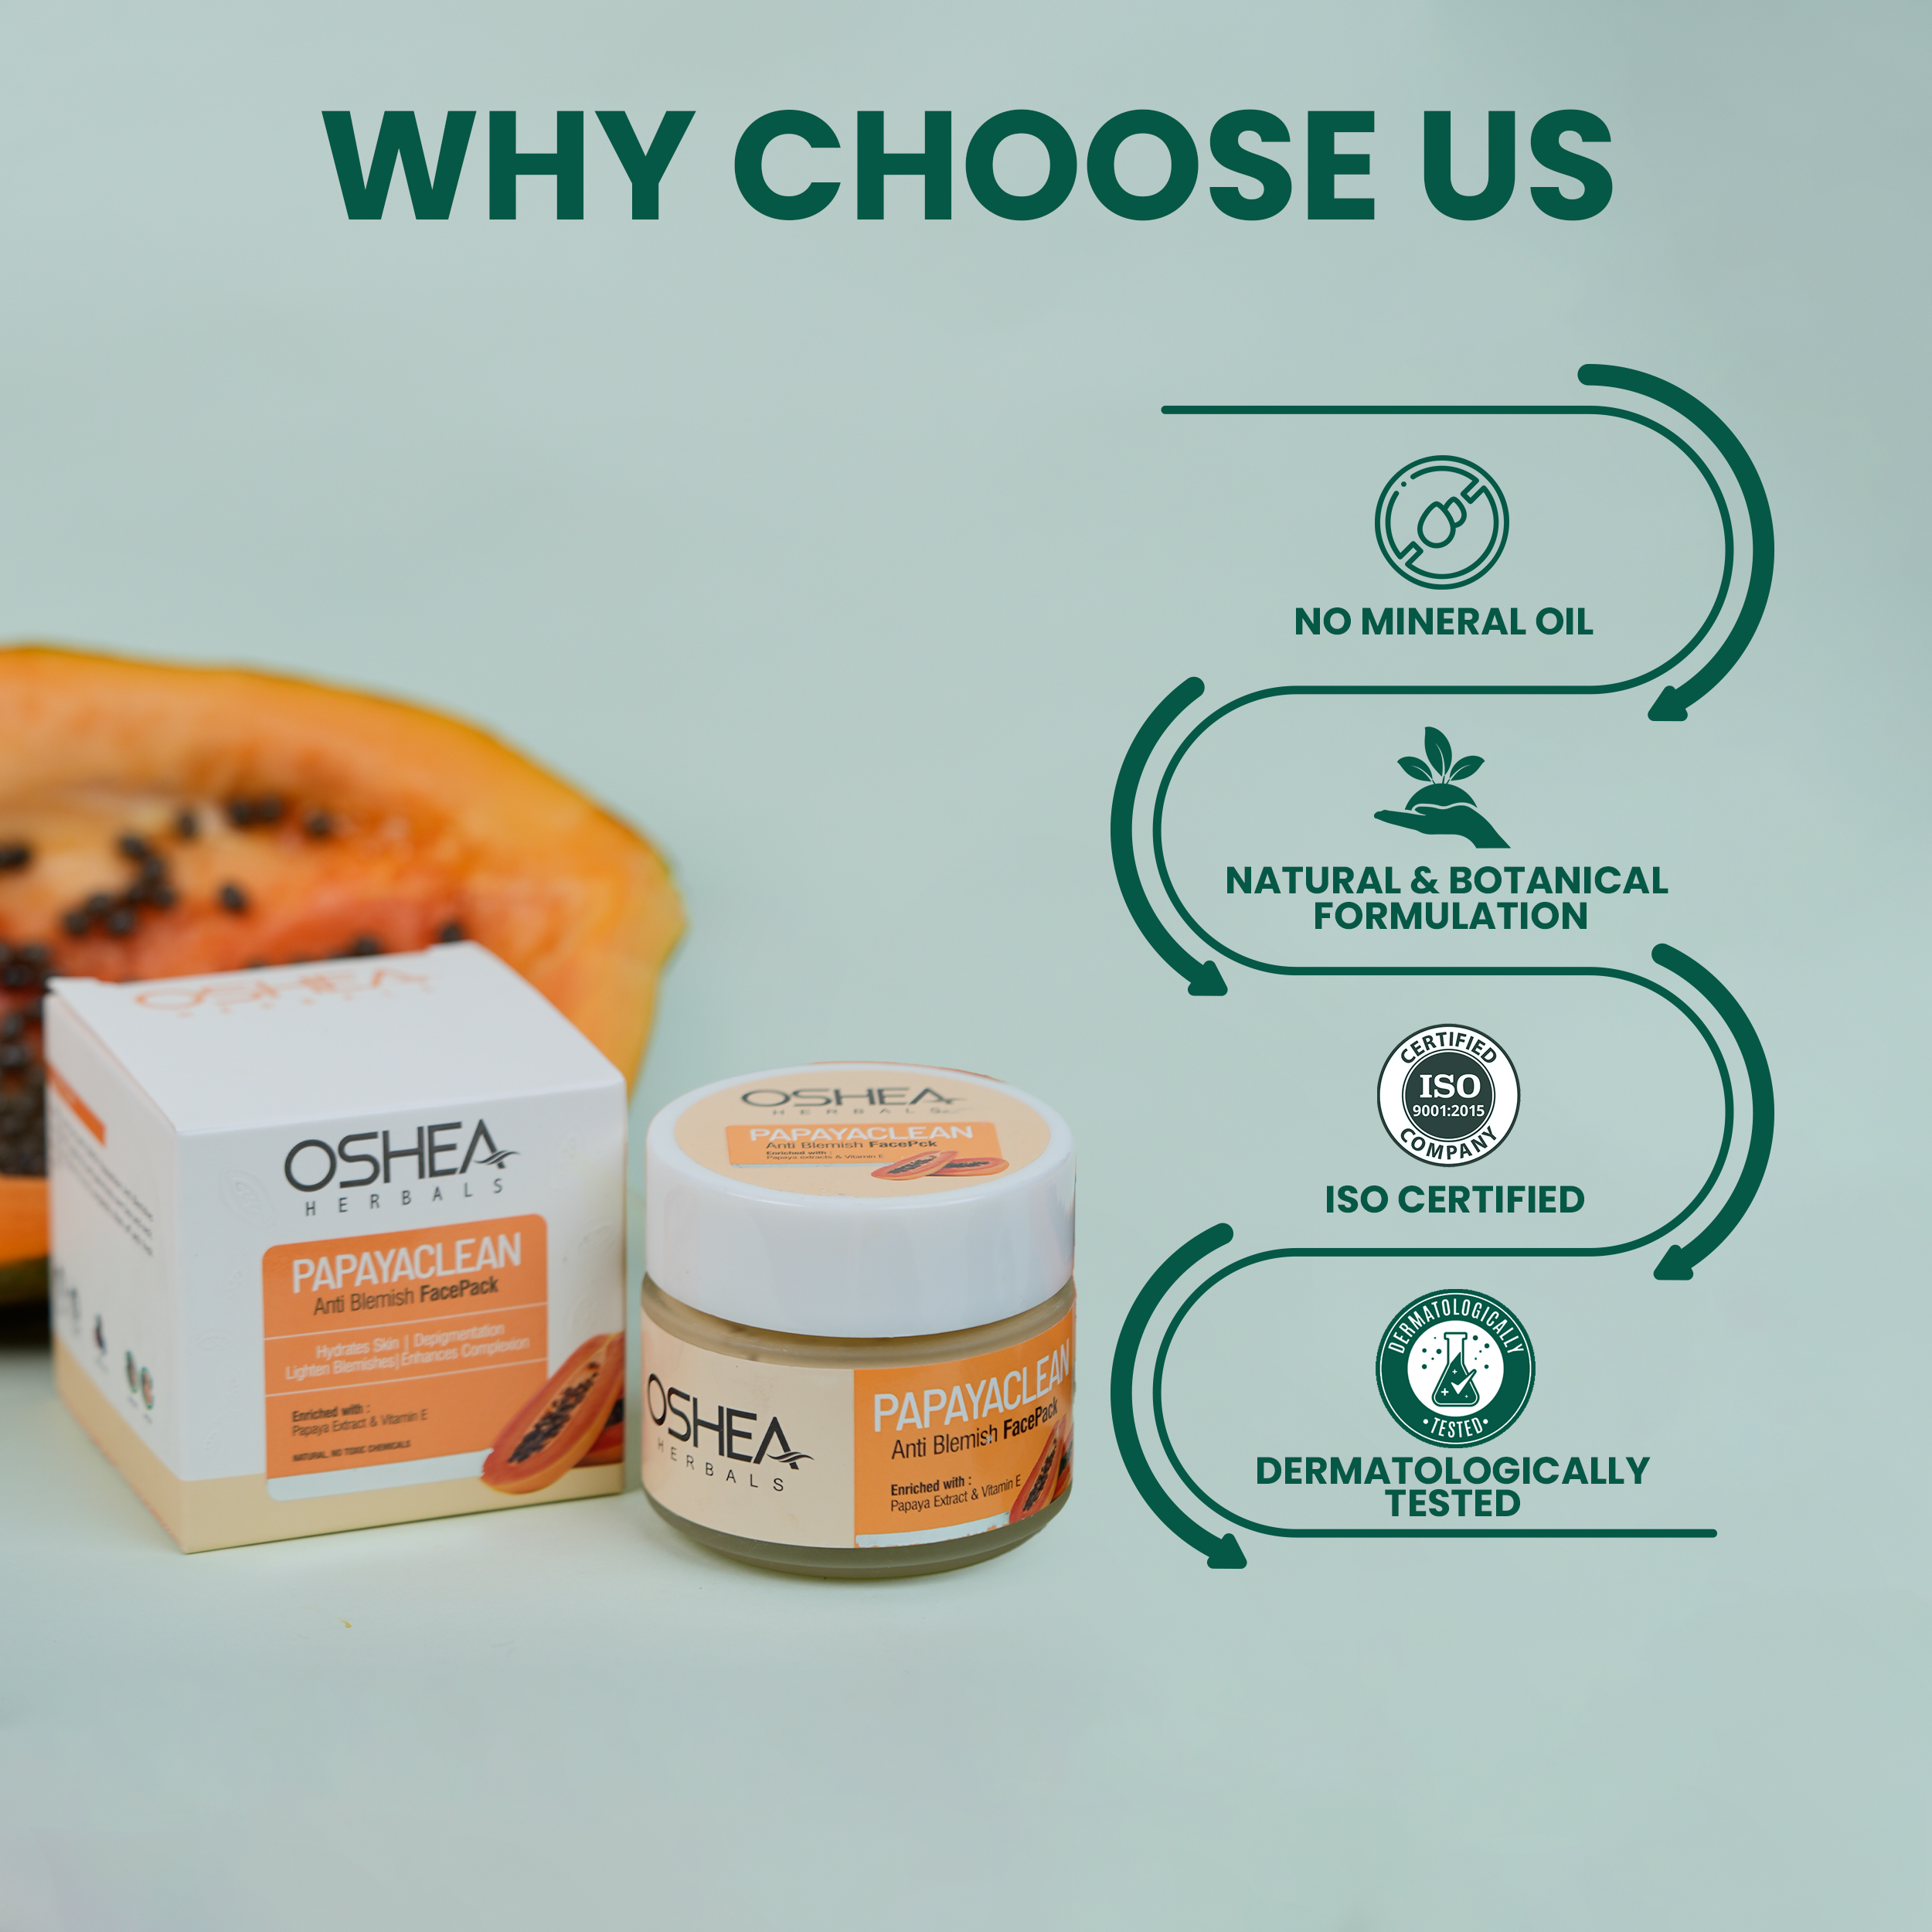 why choose us Papayaclean Anti Blemishes Face pack Oshea Herbals